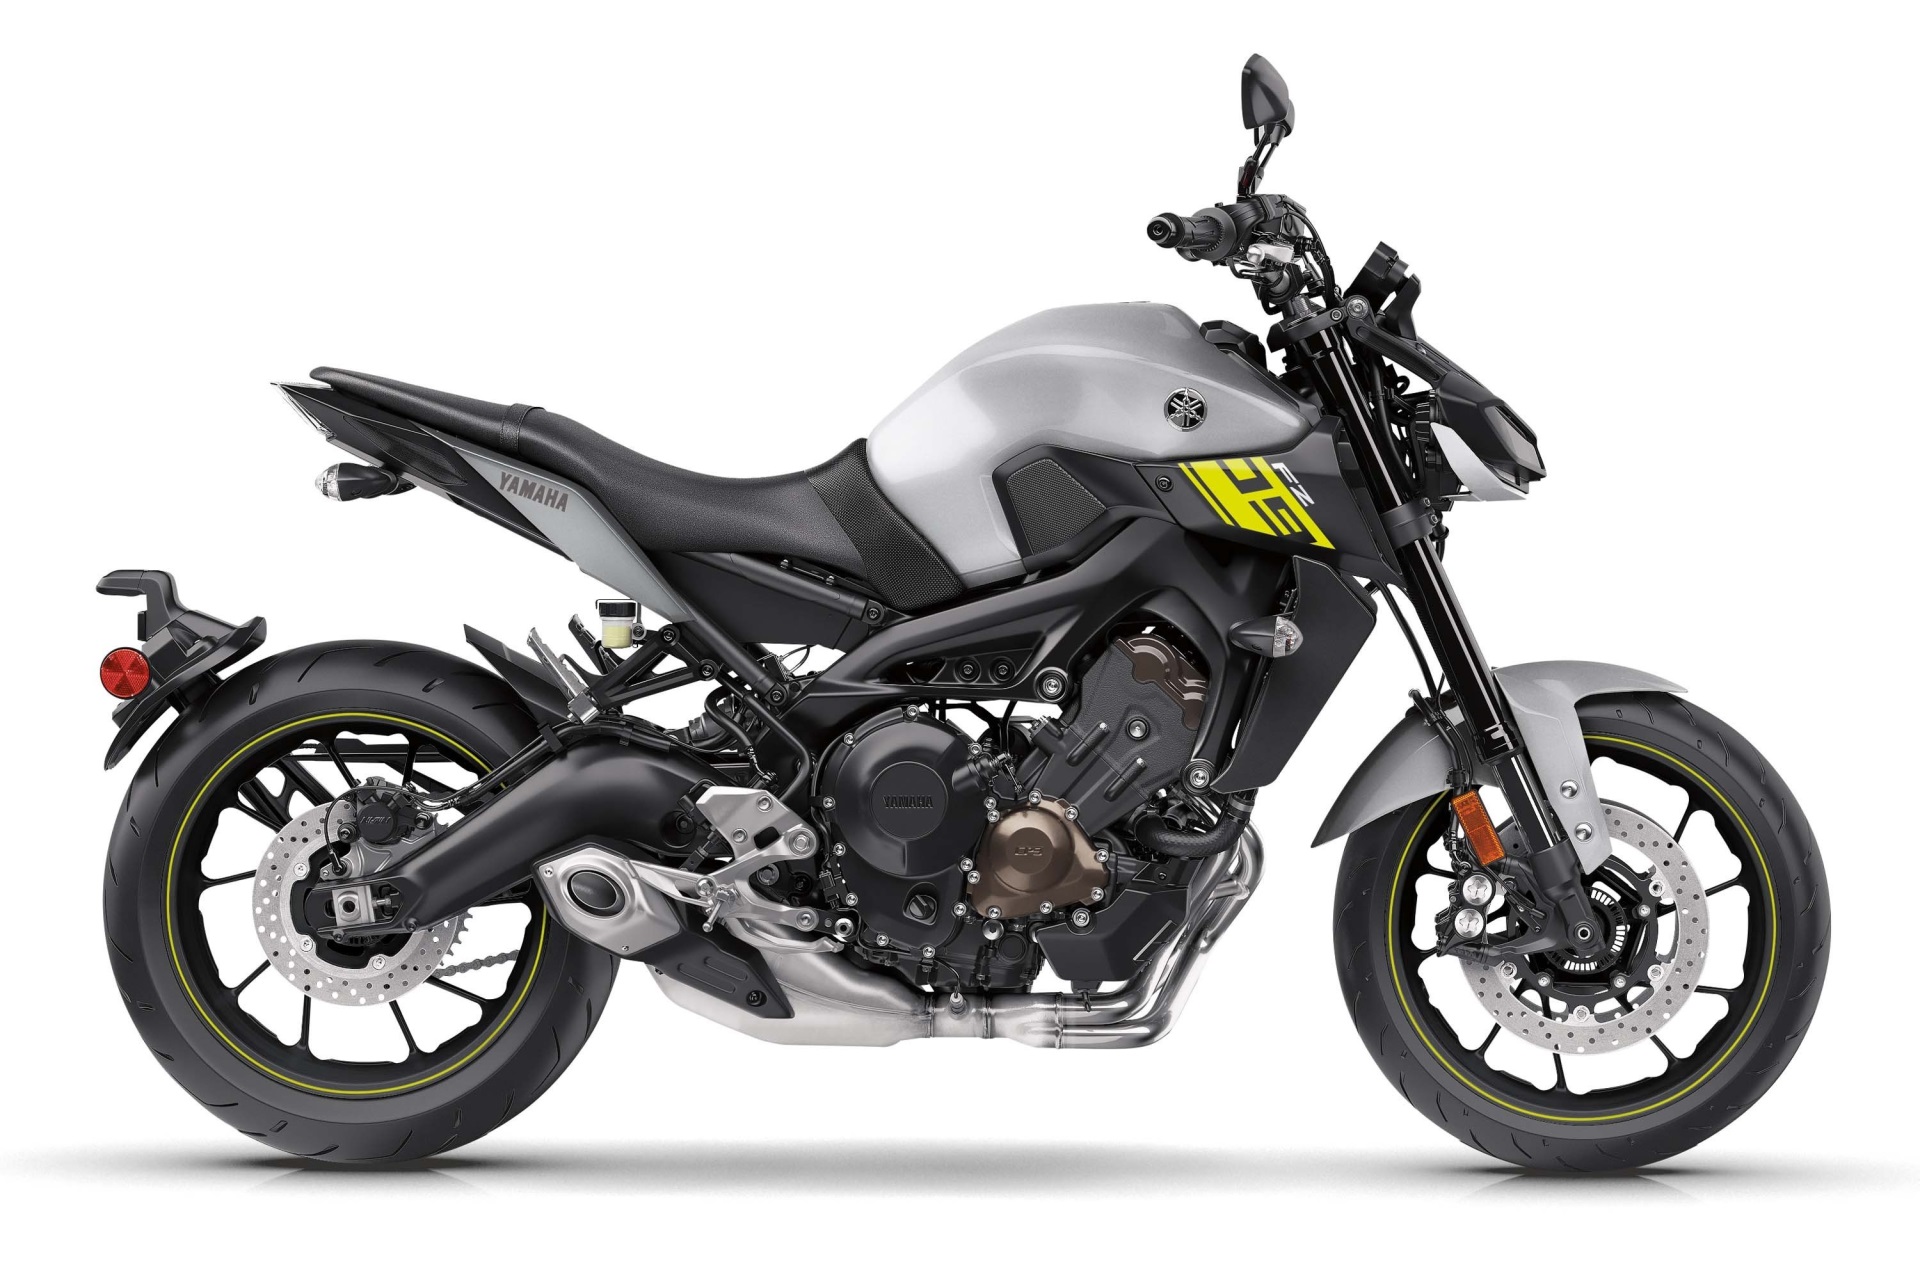 Yamaha Fz 09 Hd Wallpaper Picture - Ktm 125 Duke Price In India 2019 , HD Wallpaper & Backgrounds